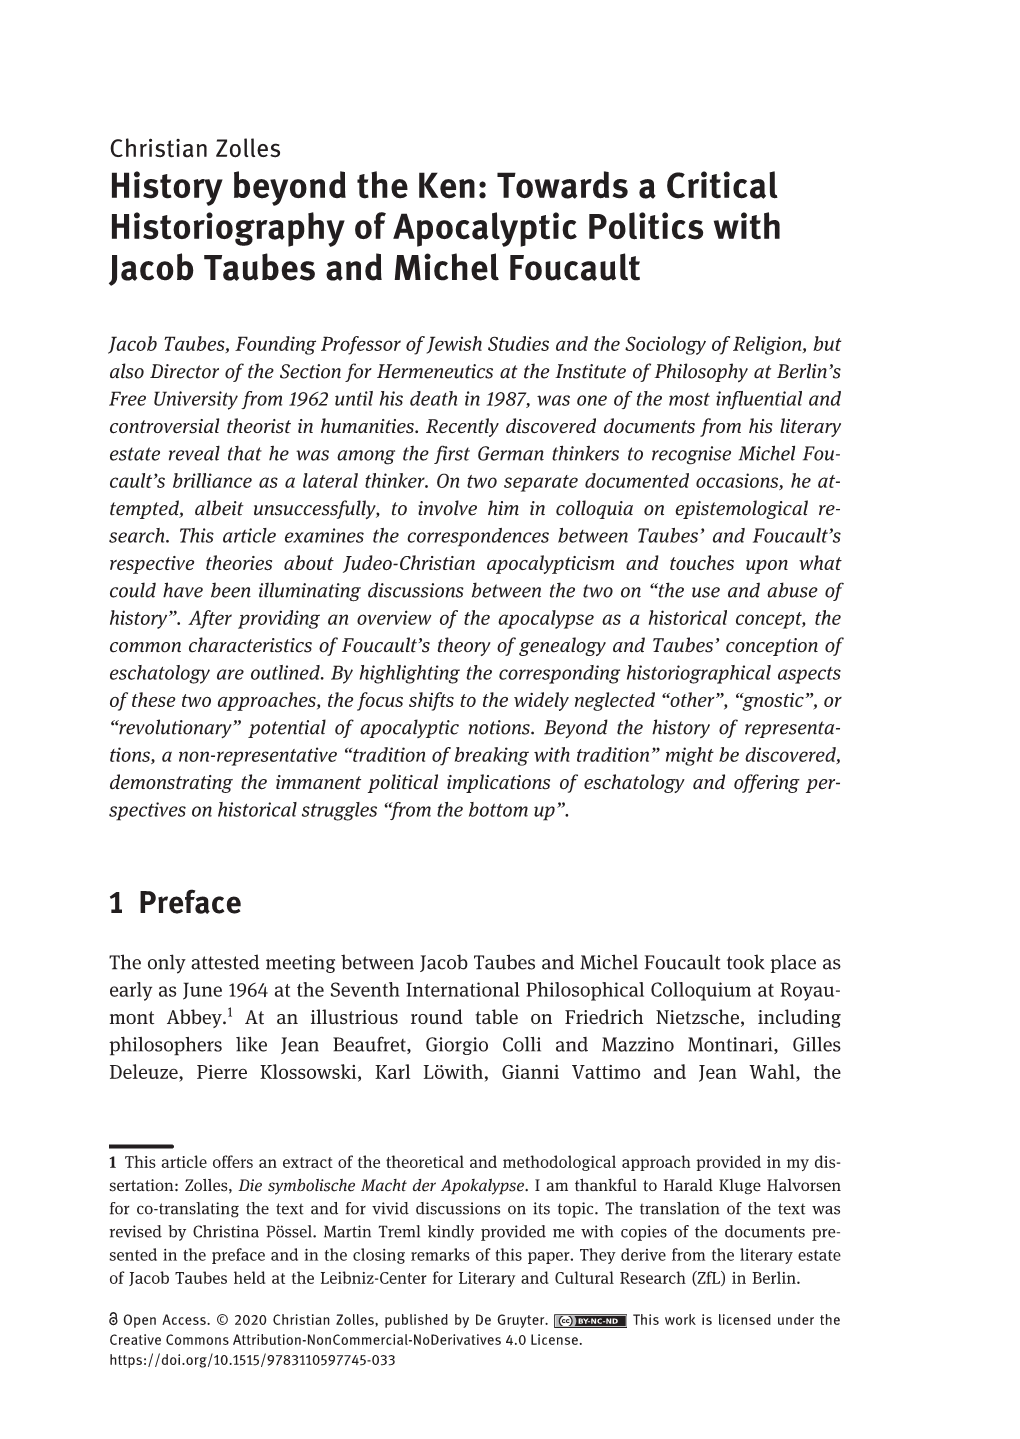 Towards a Critical Historiography of Apocalyptic Politics with Jacob Taubes and Michel Foucault